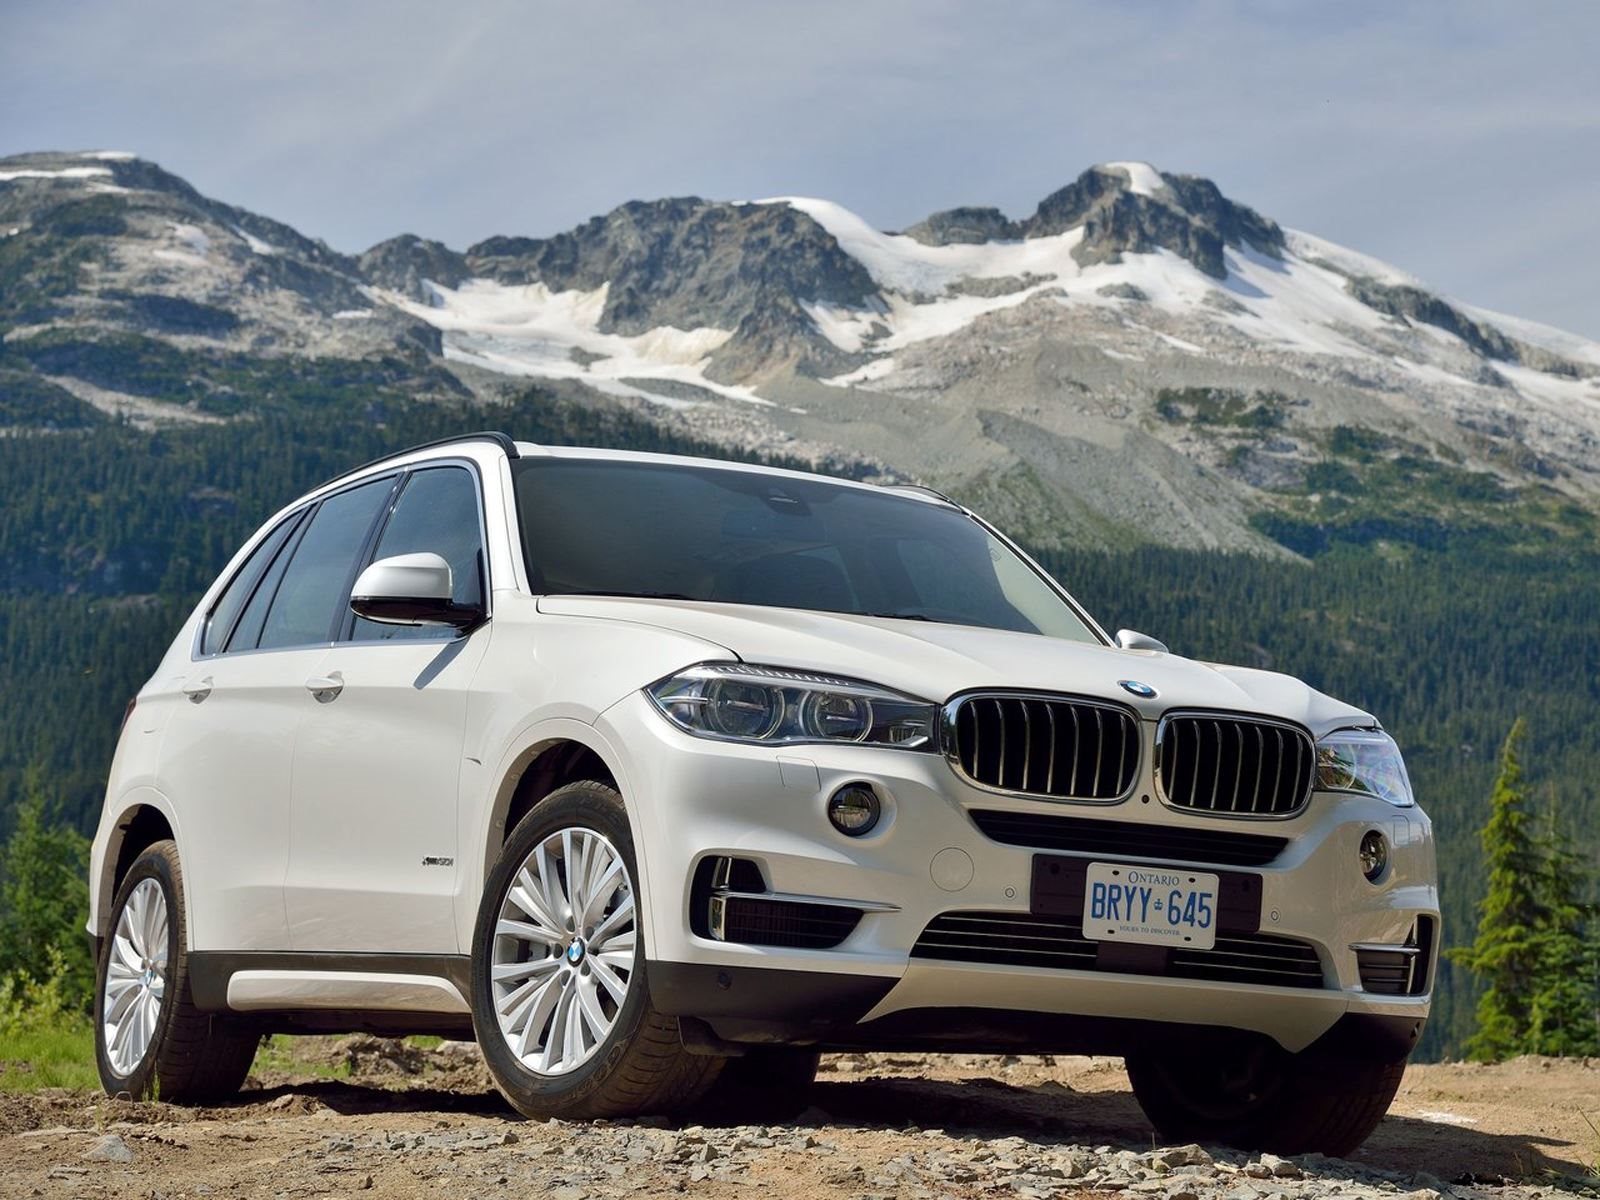 Why is BMW resale value so low?